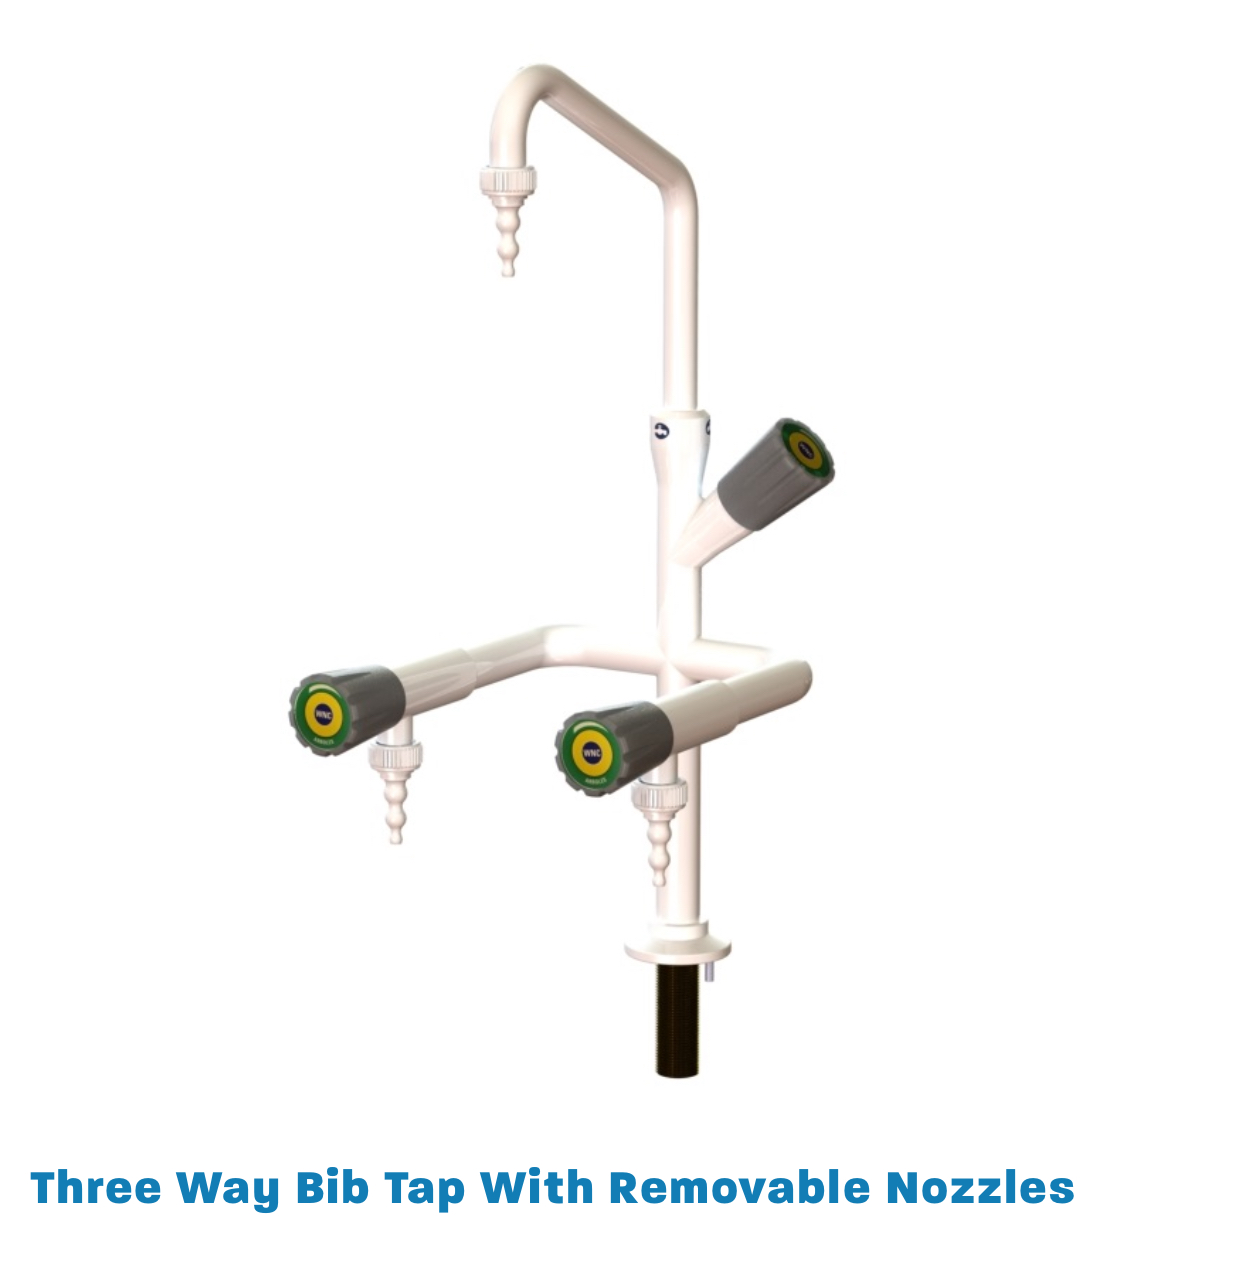 Laboratory swivel swan neck hot /cold water tap with side arms removable nozzle  school or commercial 